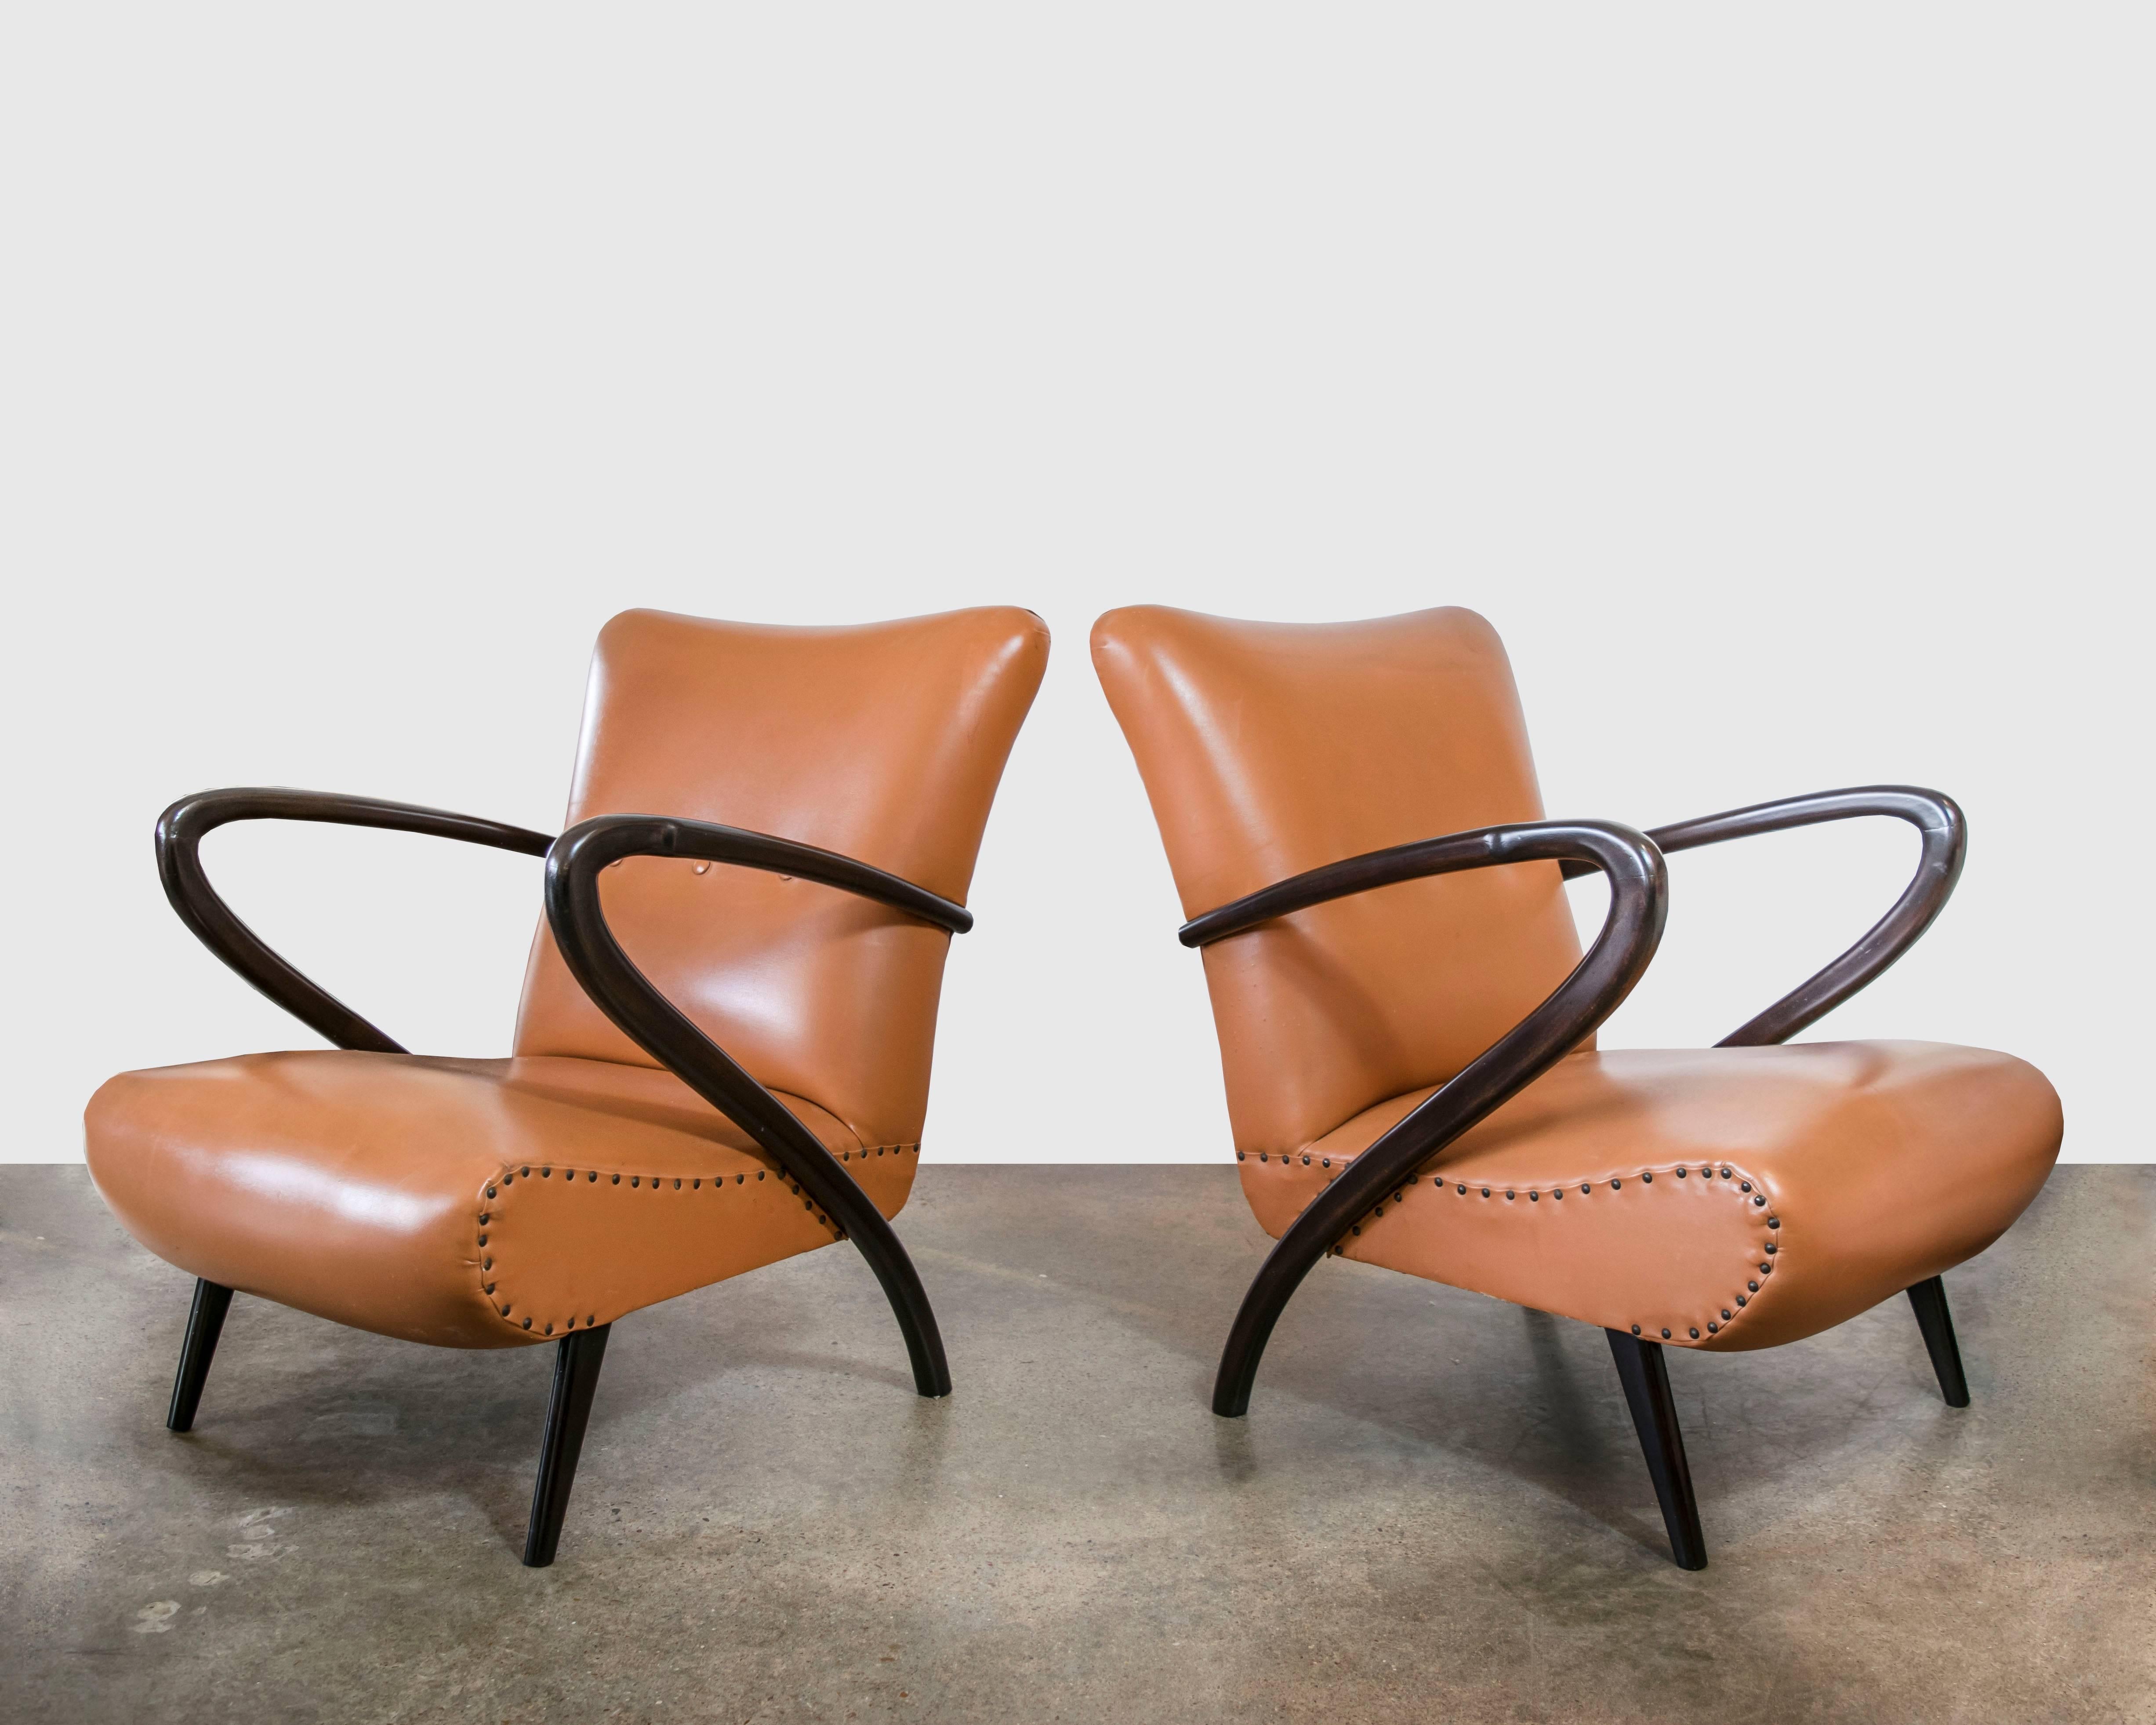 These chairs are still in their original pleather from the 1950s and need to be recovered but the style of this chair is so unusual with a mahogany combination arm and leg with the arm rails curving down and becoming the back leg.